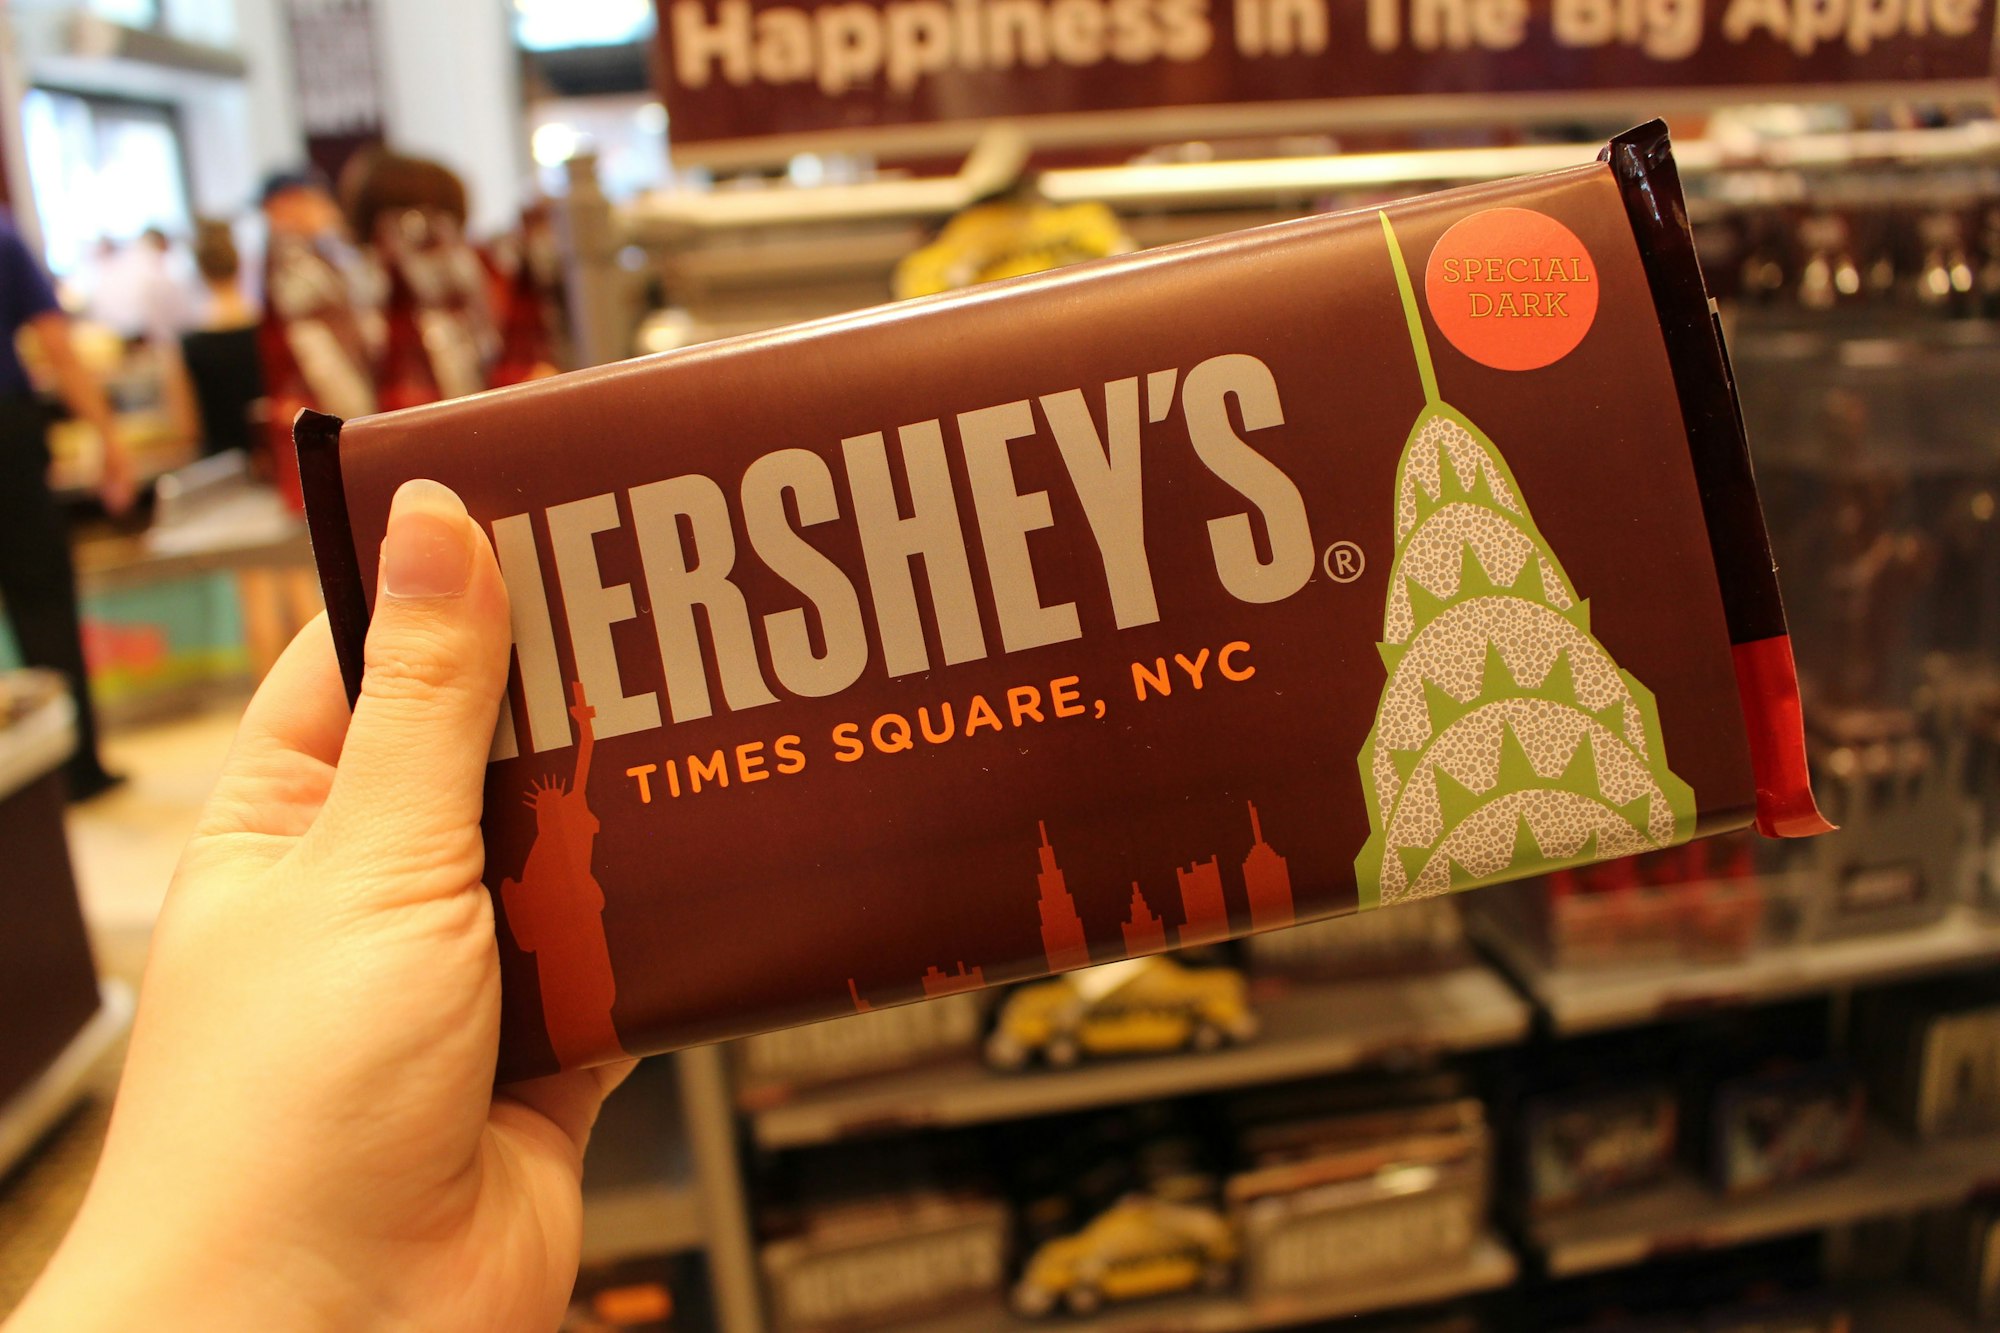 🍫New Yorker files lawsuit against Hershey, claiming chocolate products contain dangerous levels of heavy metals.